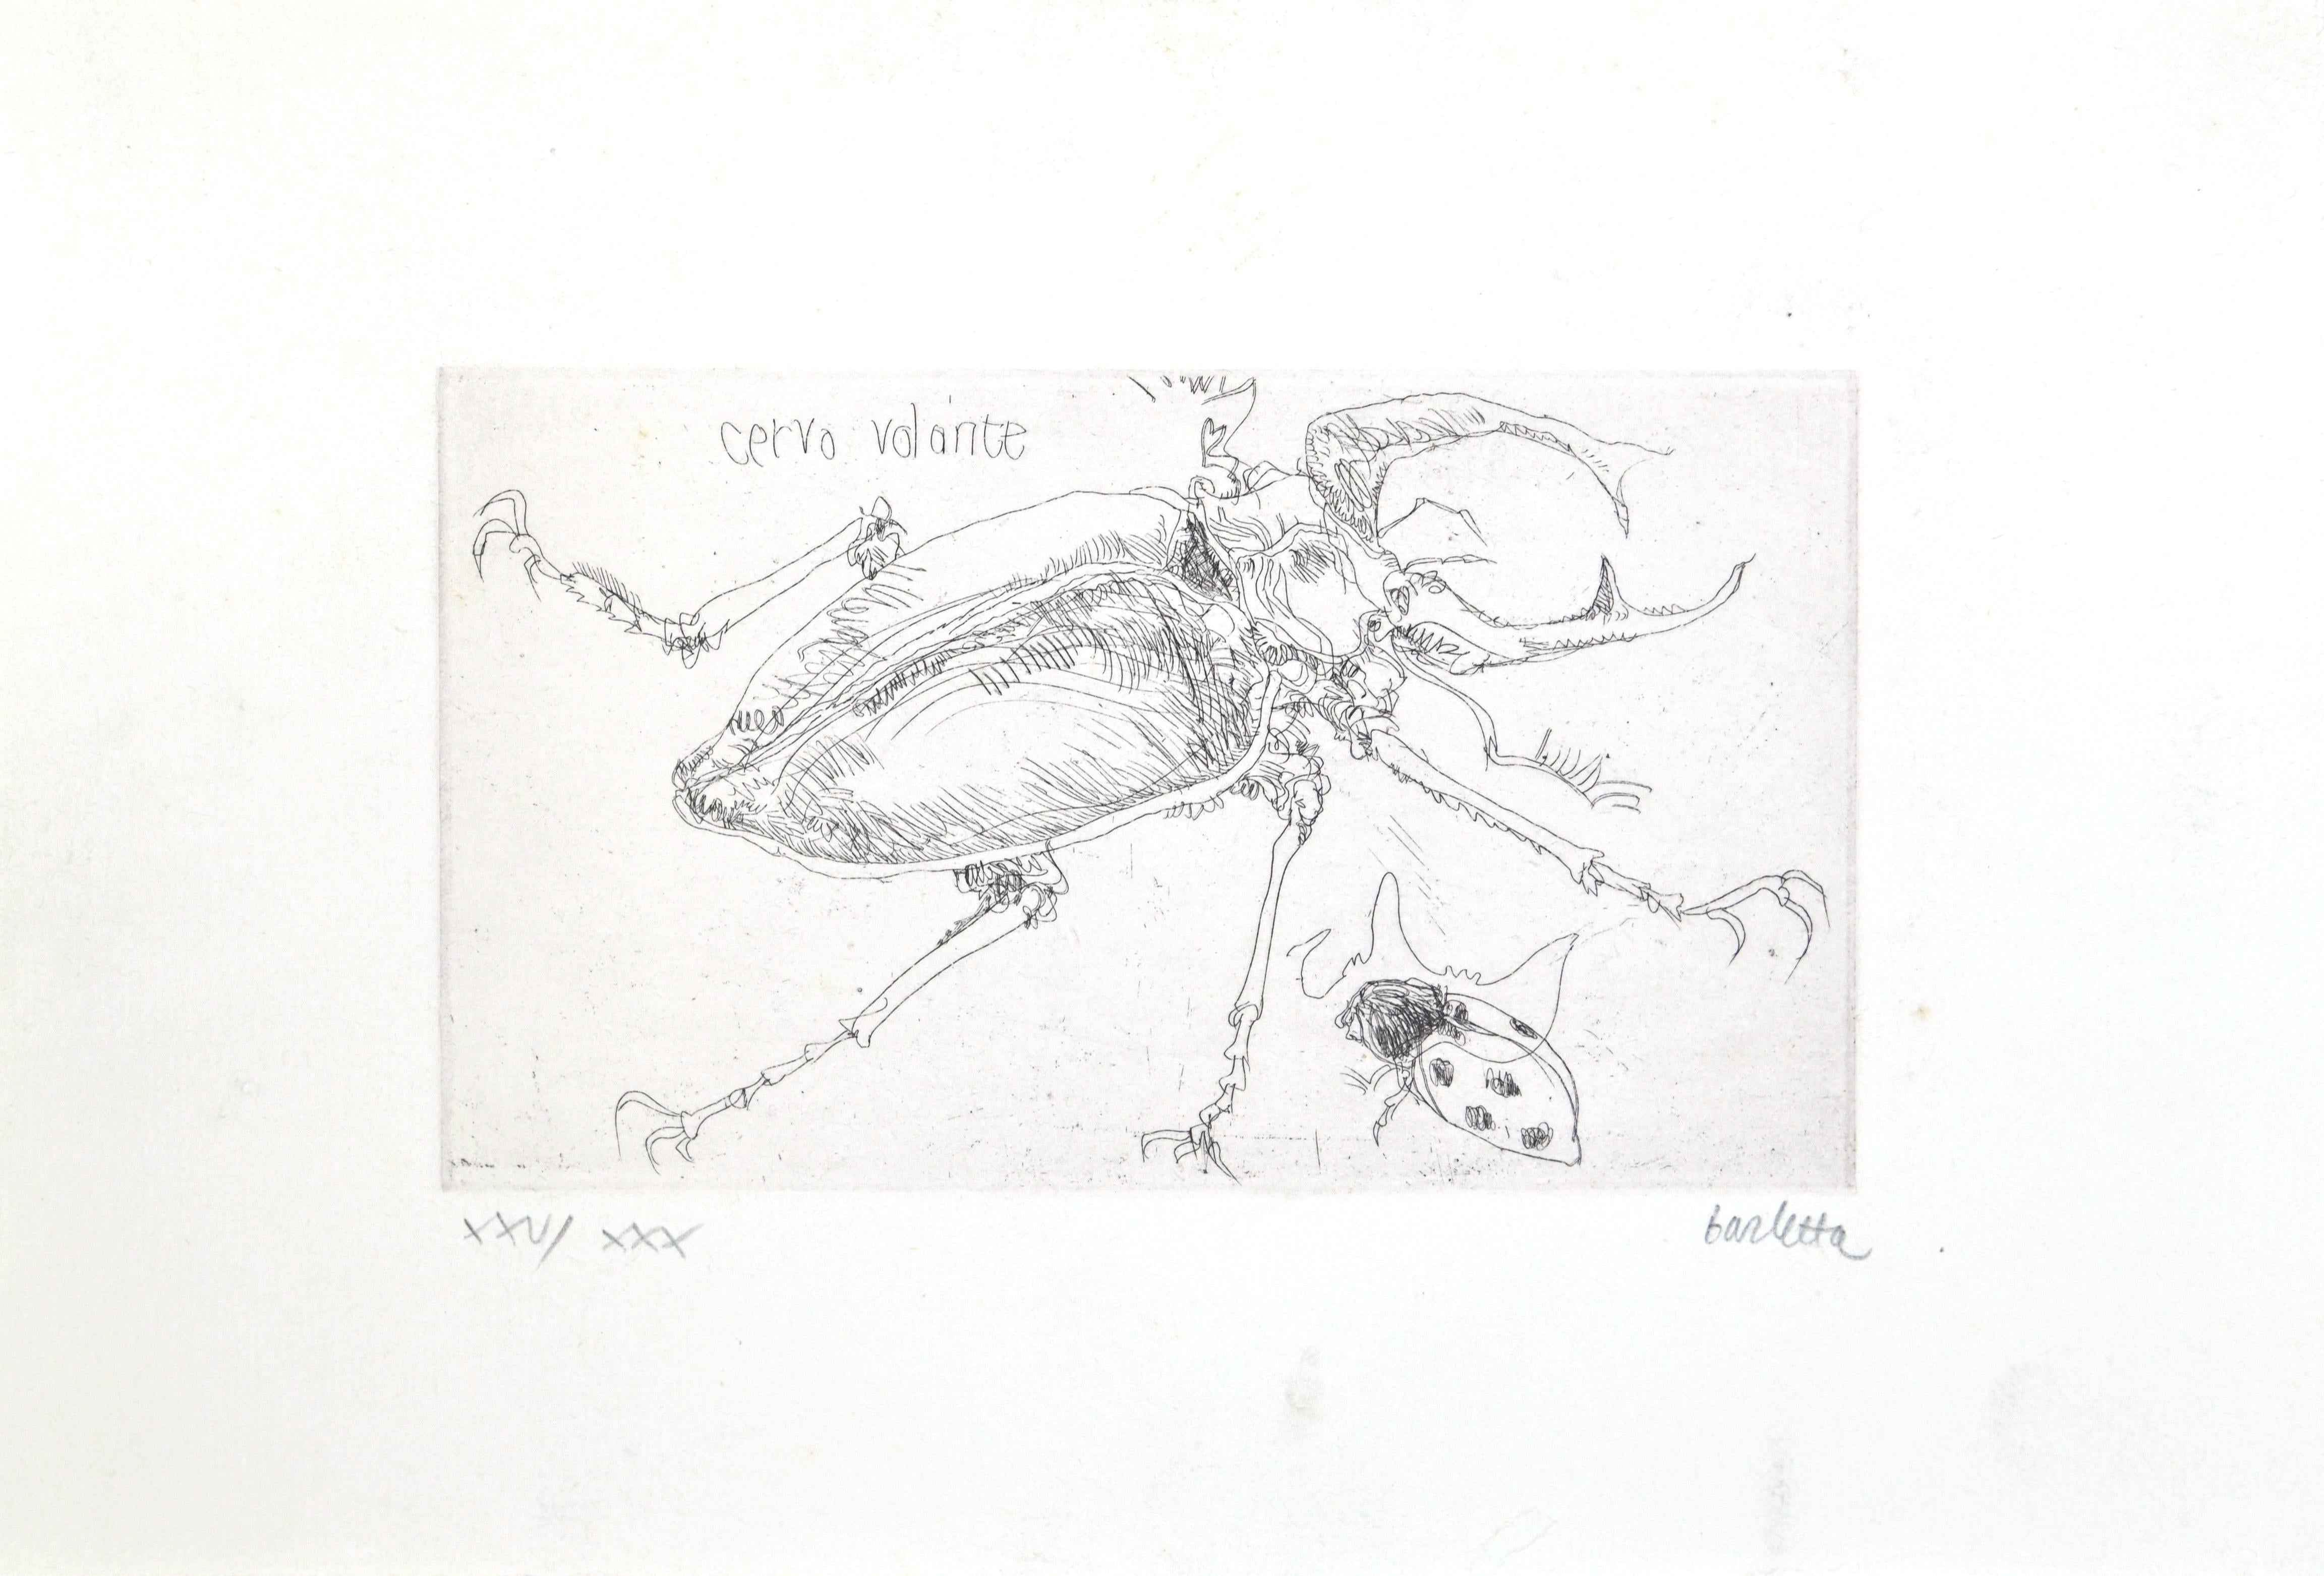 Insects is an etching, realized by Sergio Barletta in 1974.

Hand-signed in pencil on the lower right. Numbered on the lower left in Roman numerals, from the edition of XXX prints.

Titled in Italian at the top left "Cervo Volante". Image